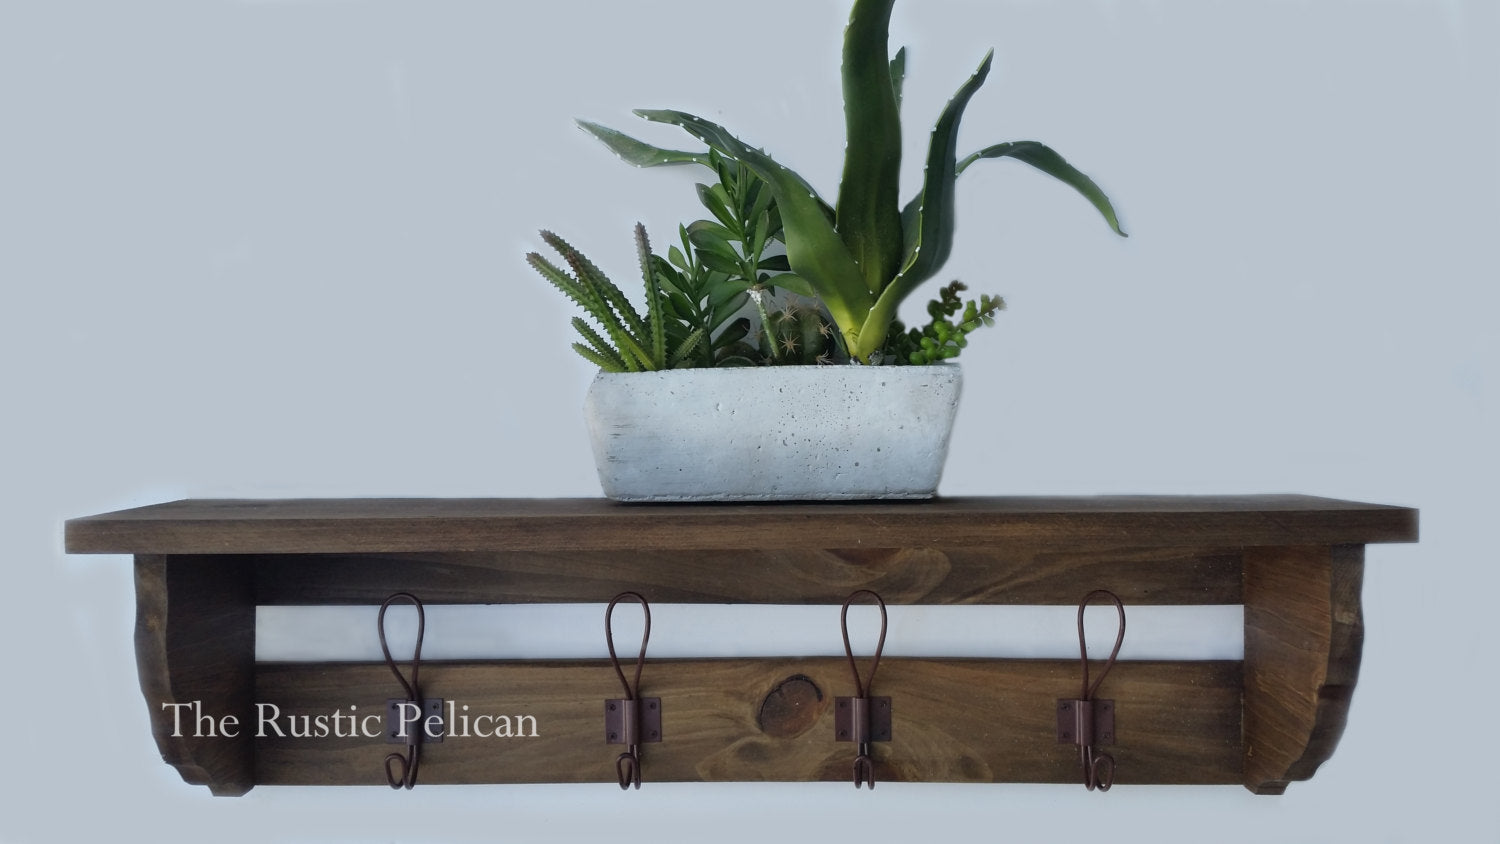 Reclaimed Wood Coat Rack and Shelf – Still and Bloom